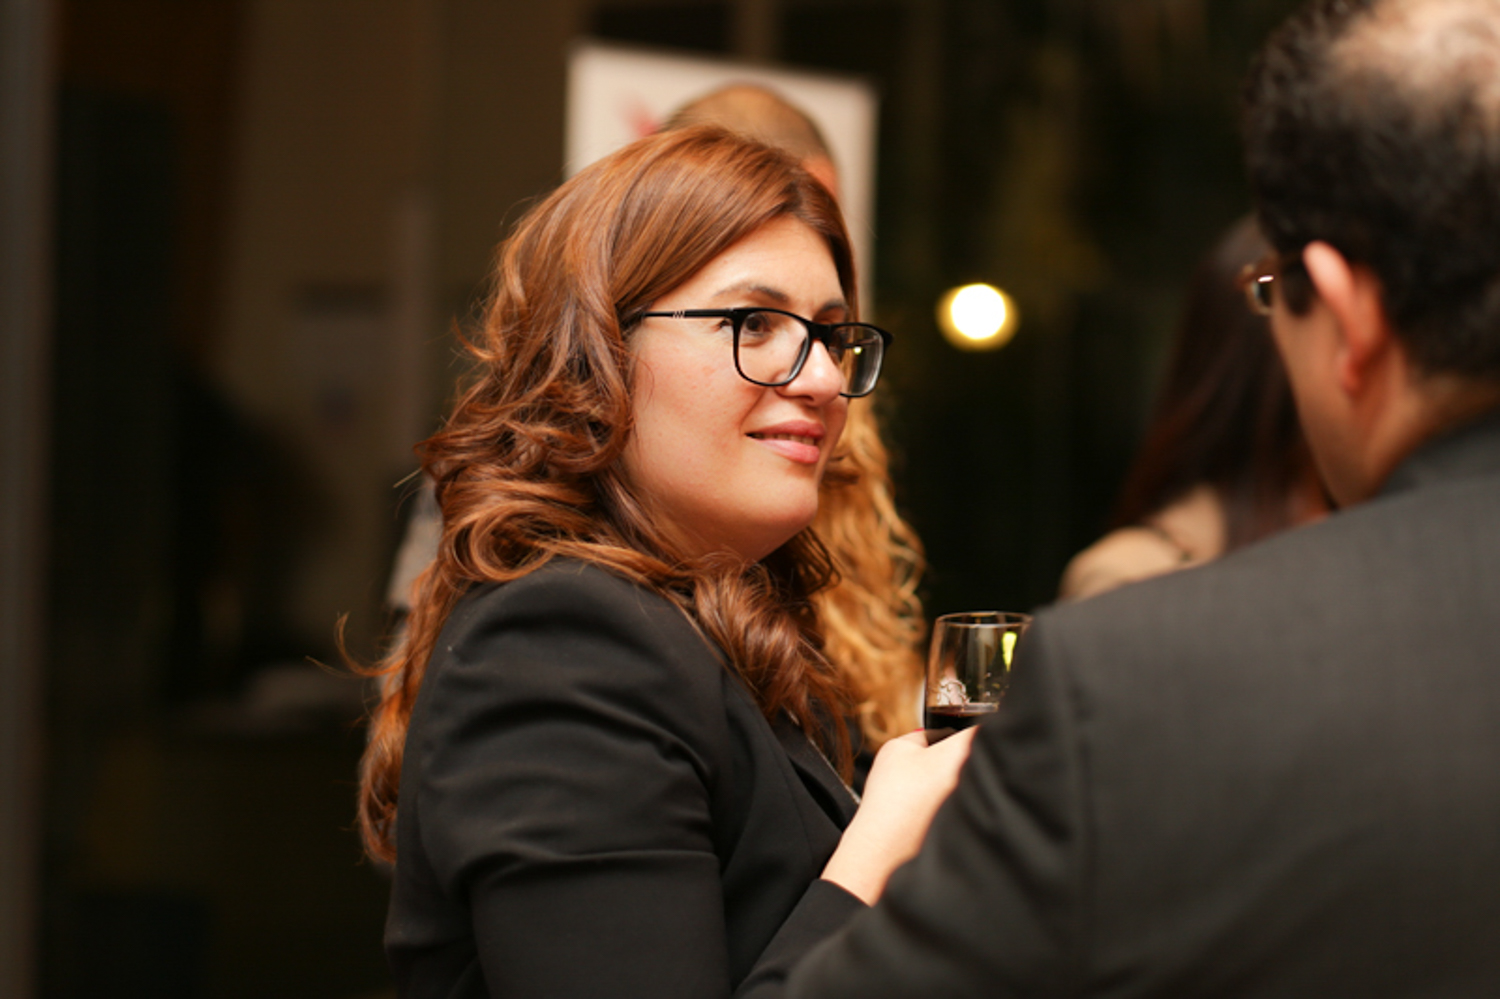 Lady with long brown hair holding glass of wine talking to a man at a business event